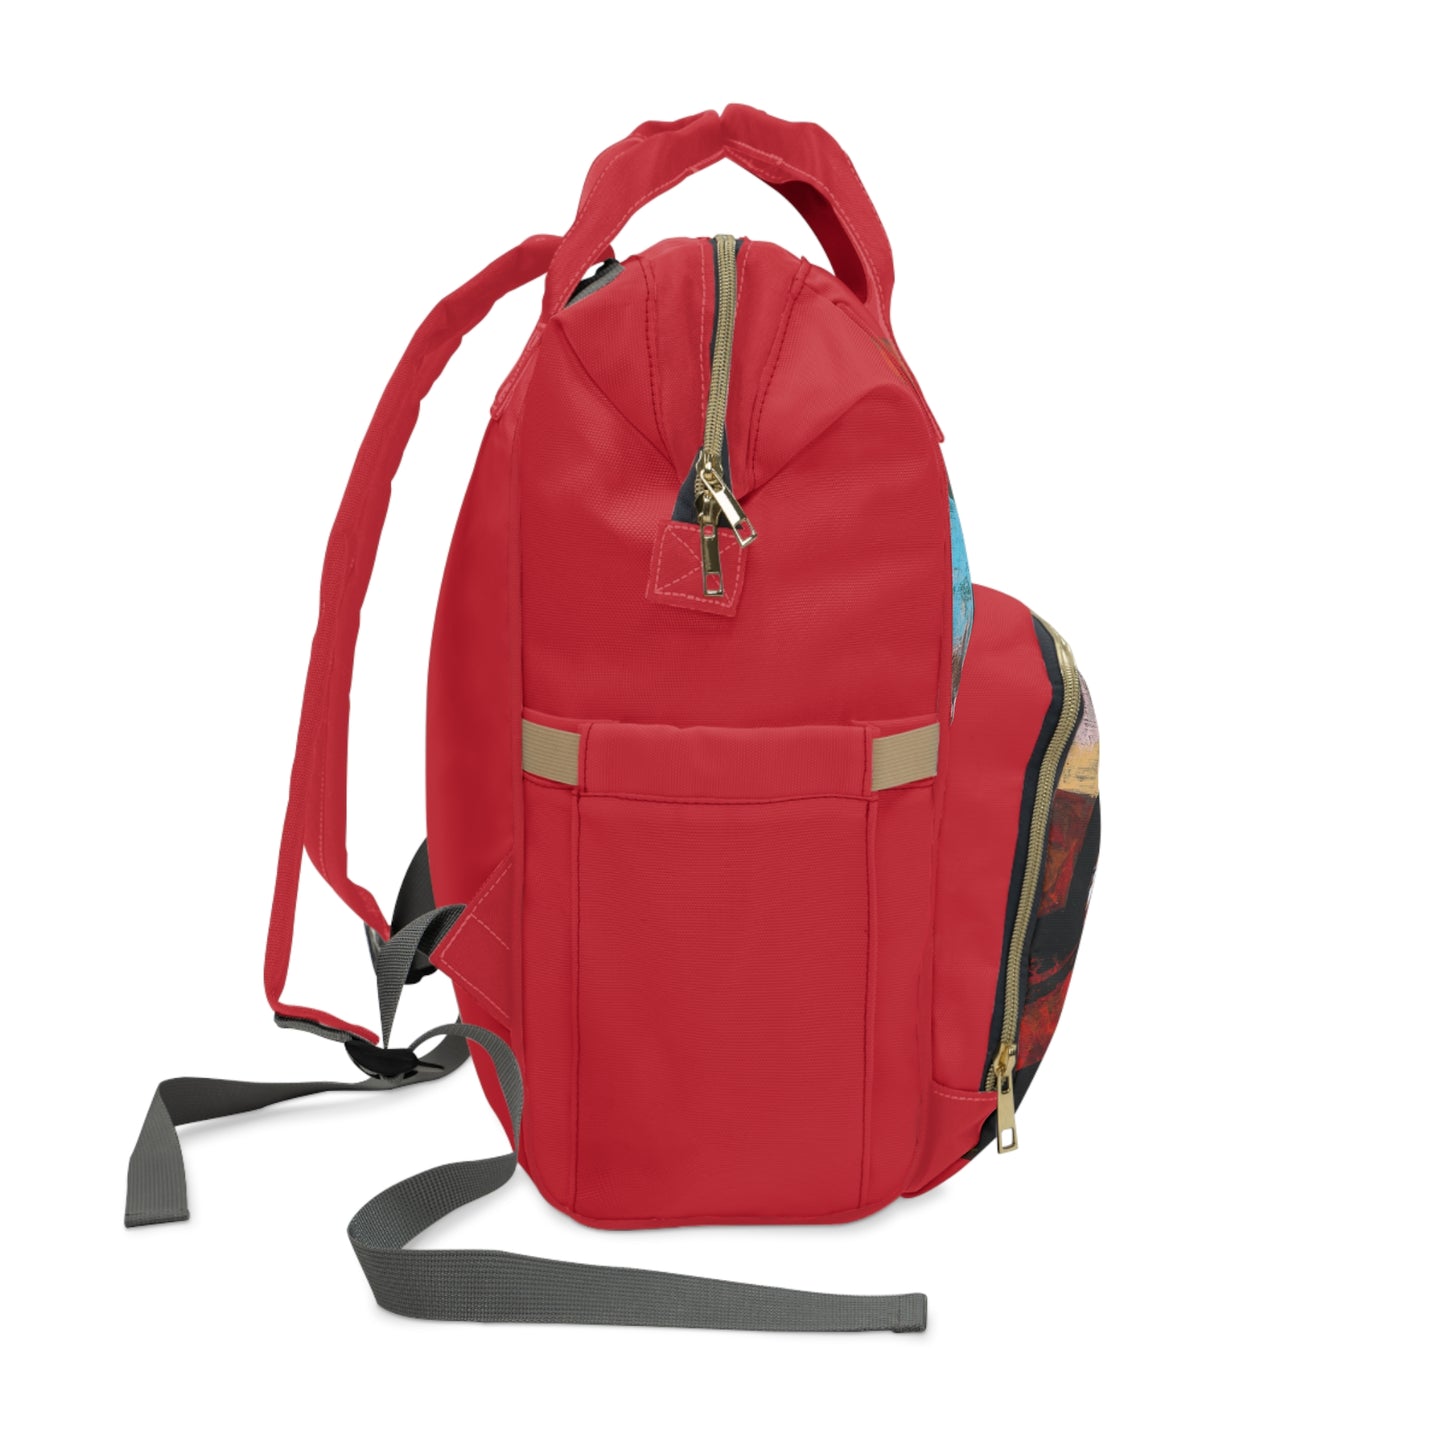 Backpack - Book Bag- Multipurpose Backpack - At the end of the day - Red